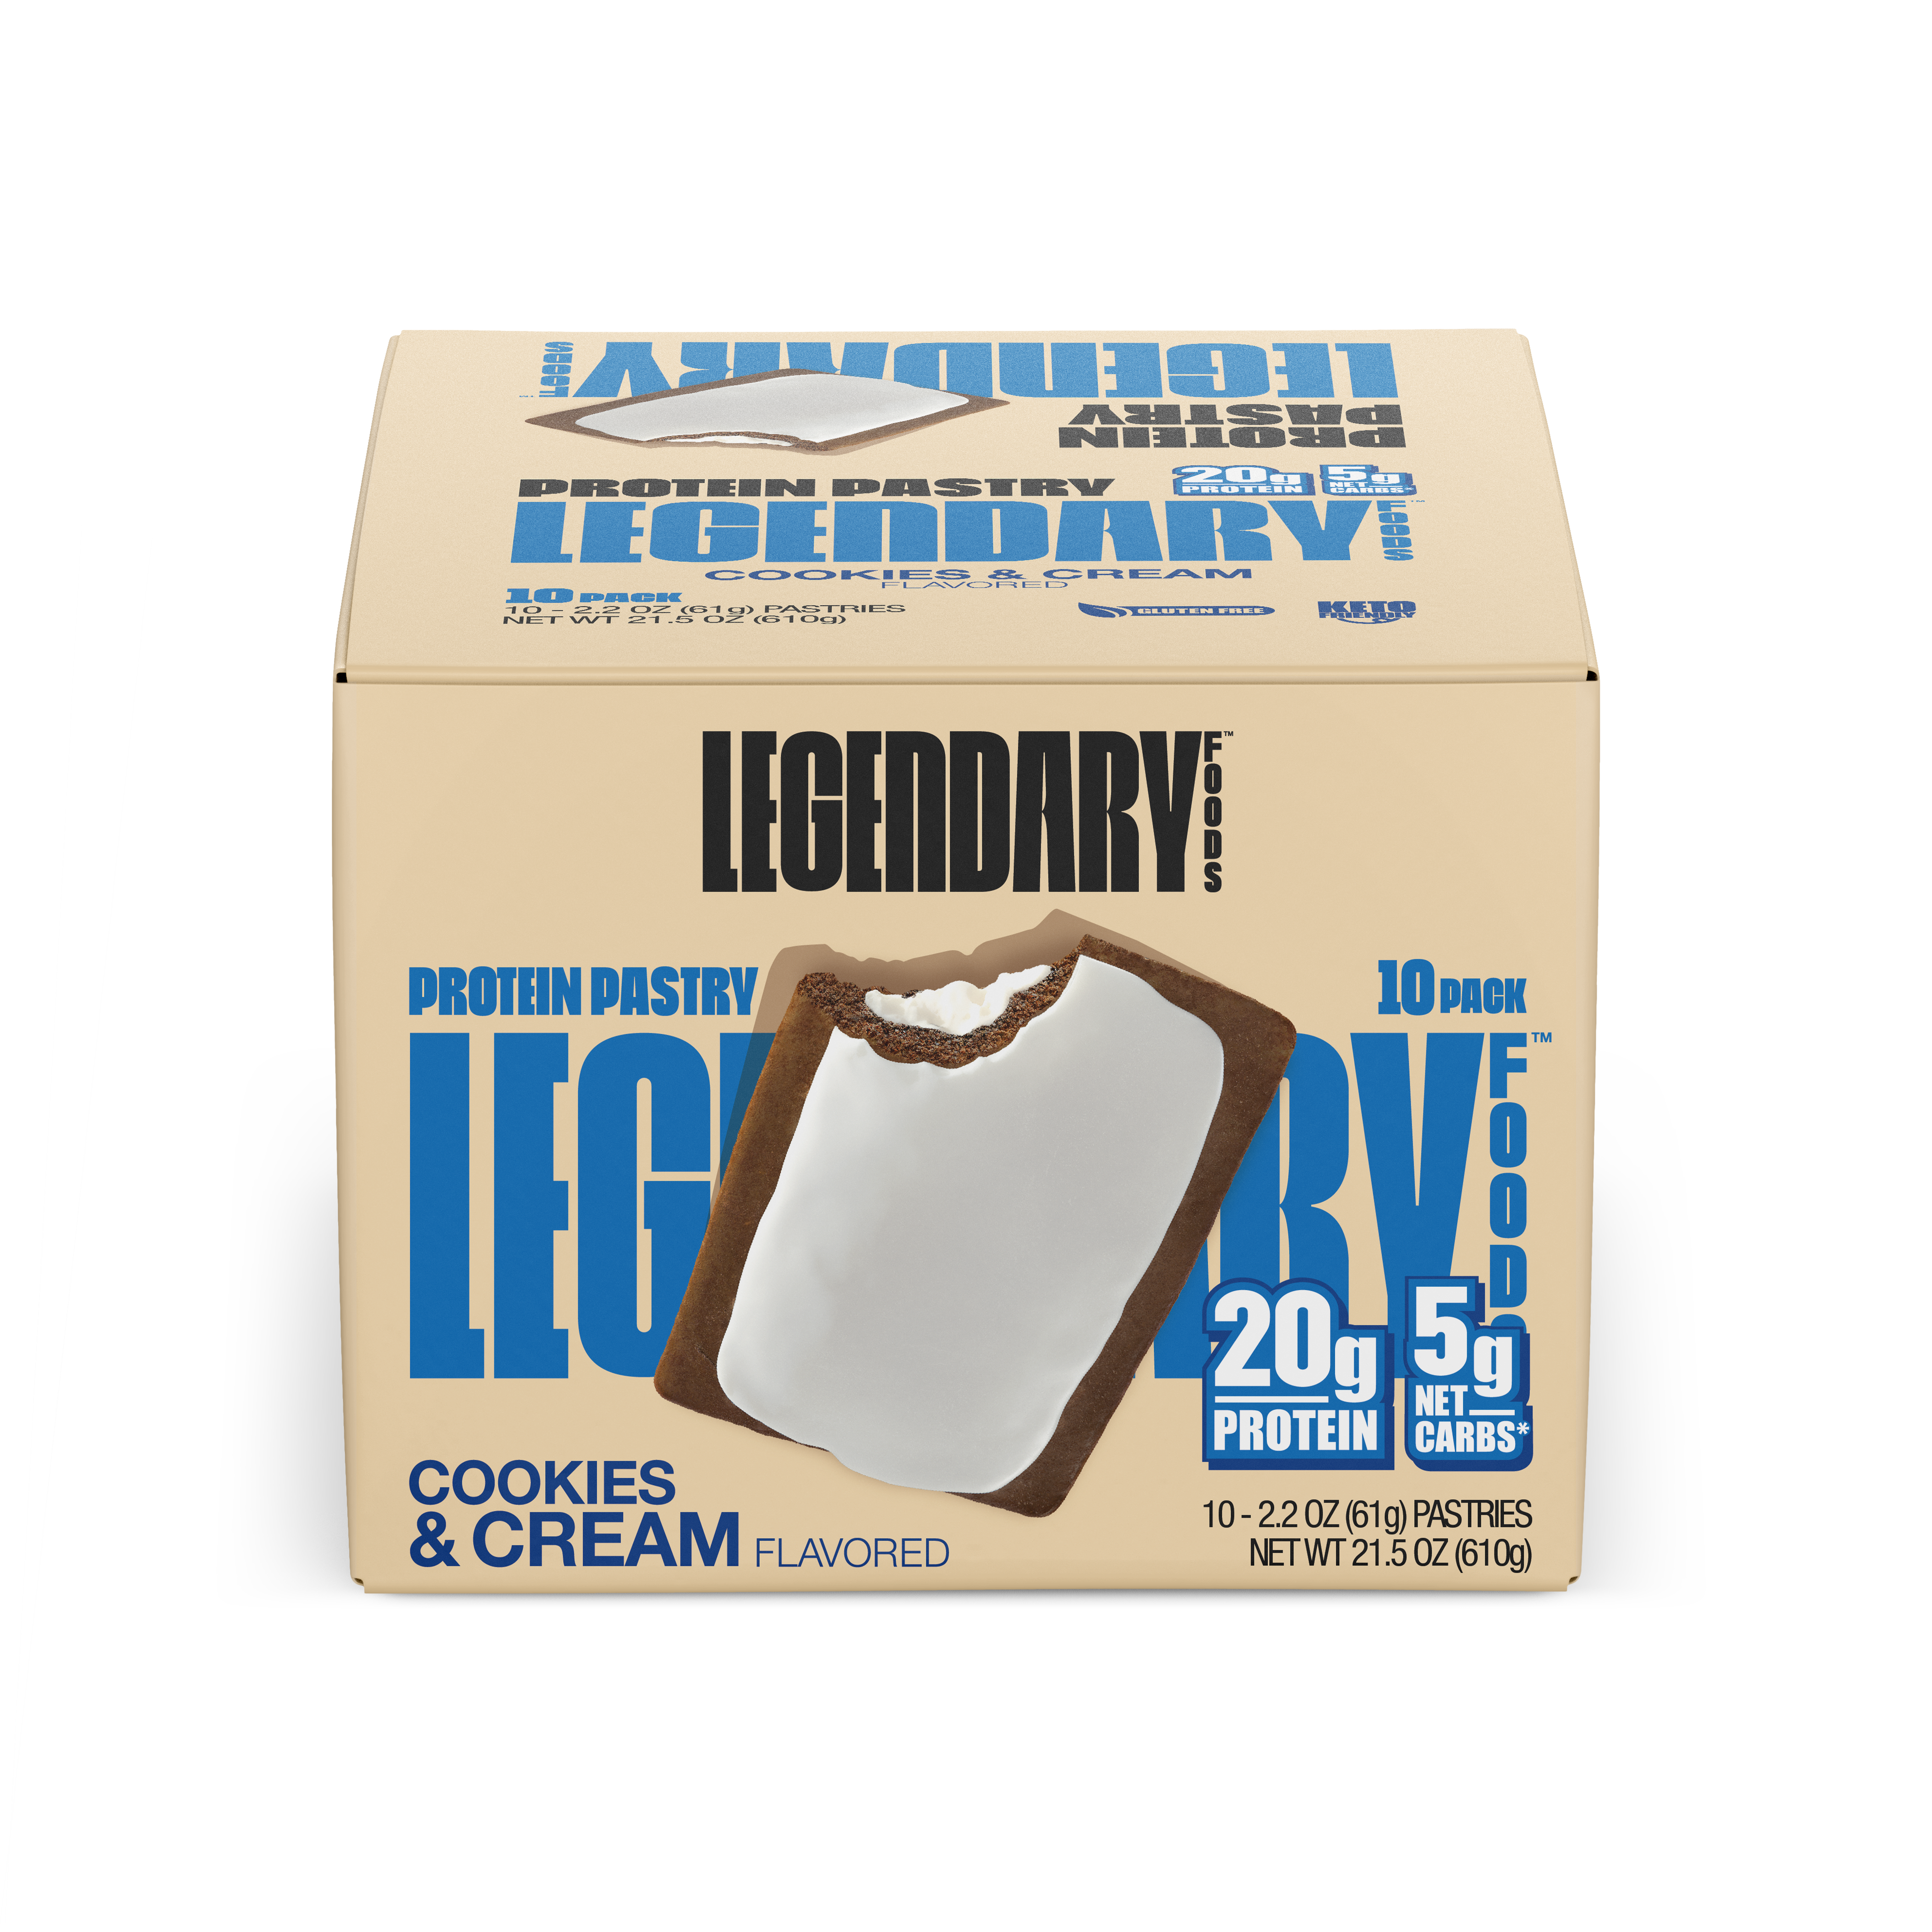 "Cake Style" Low-Carb Protein Pastry by Legendary Foods - Cookies and Cream